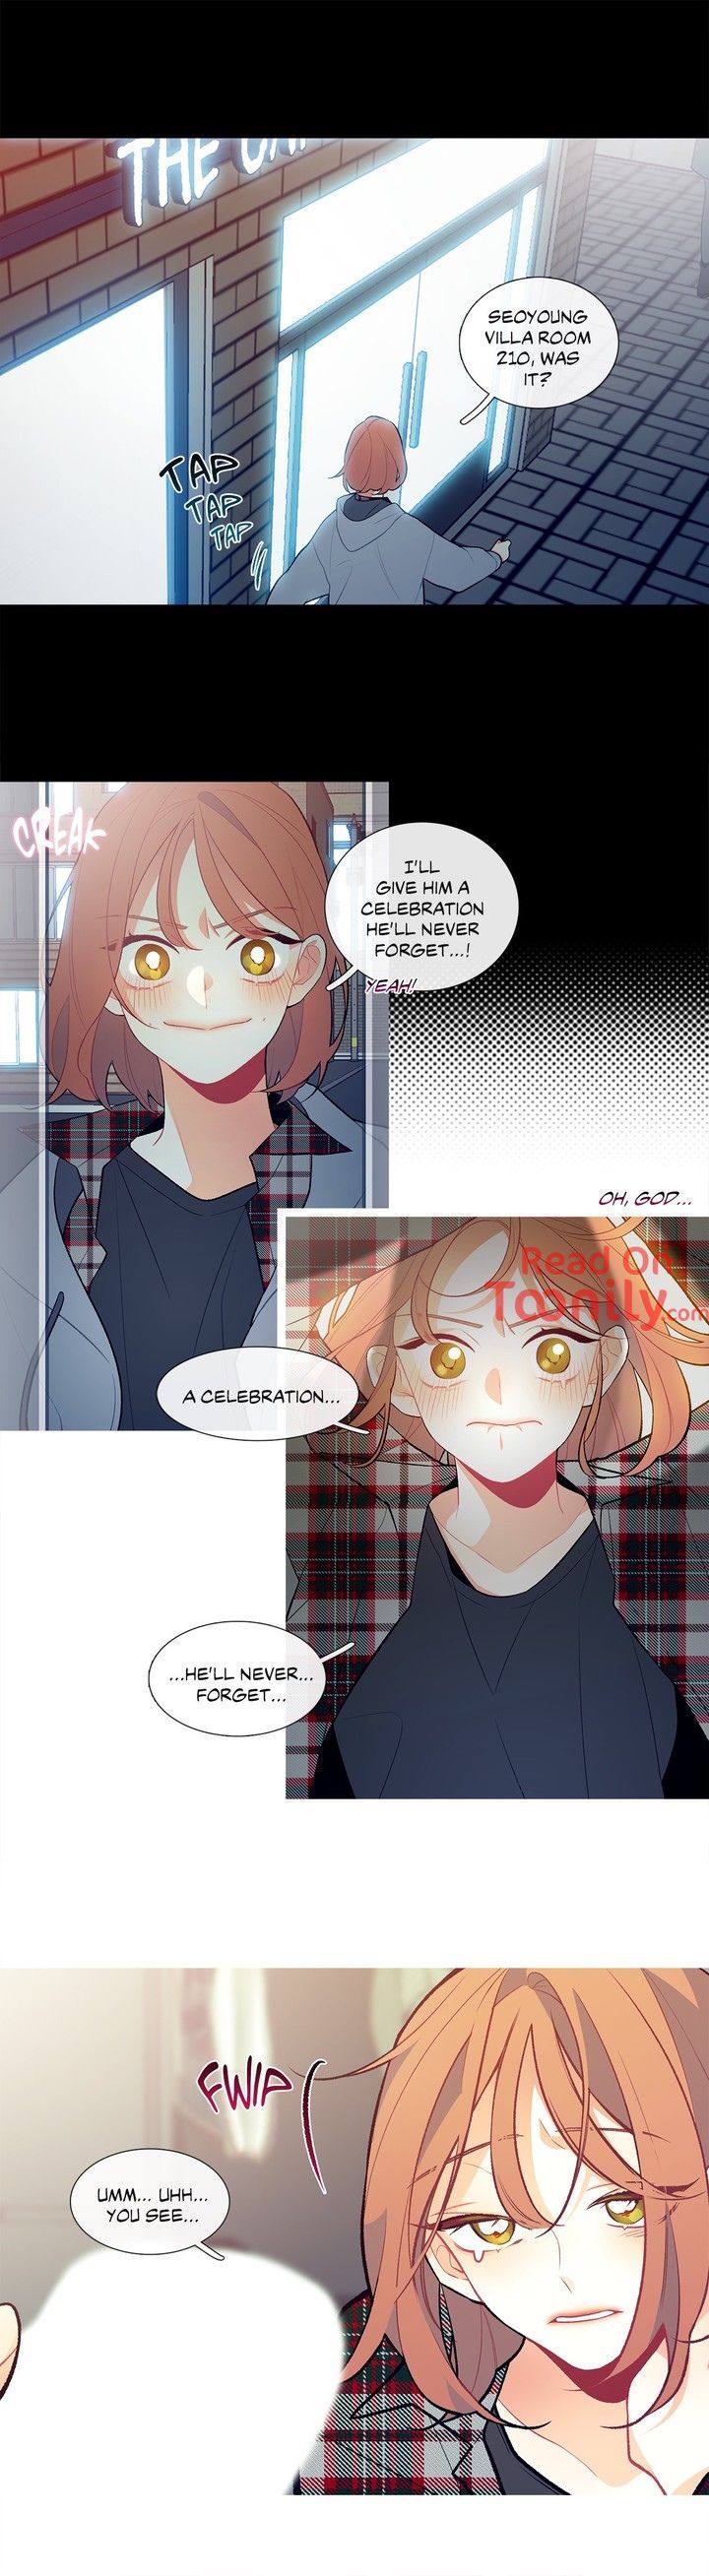 What’s Going On? - Chapter 3 Page 6